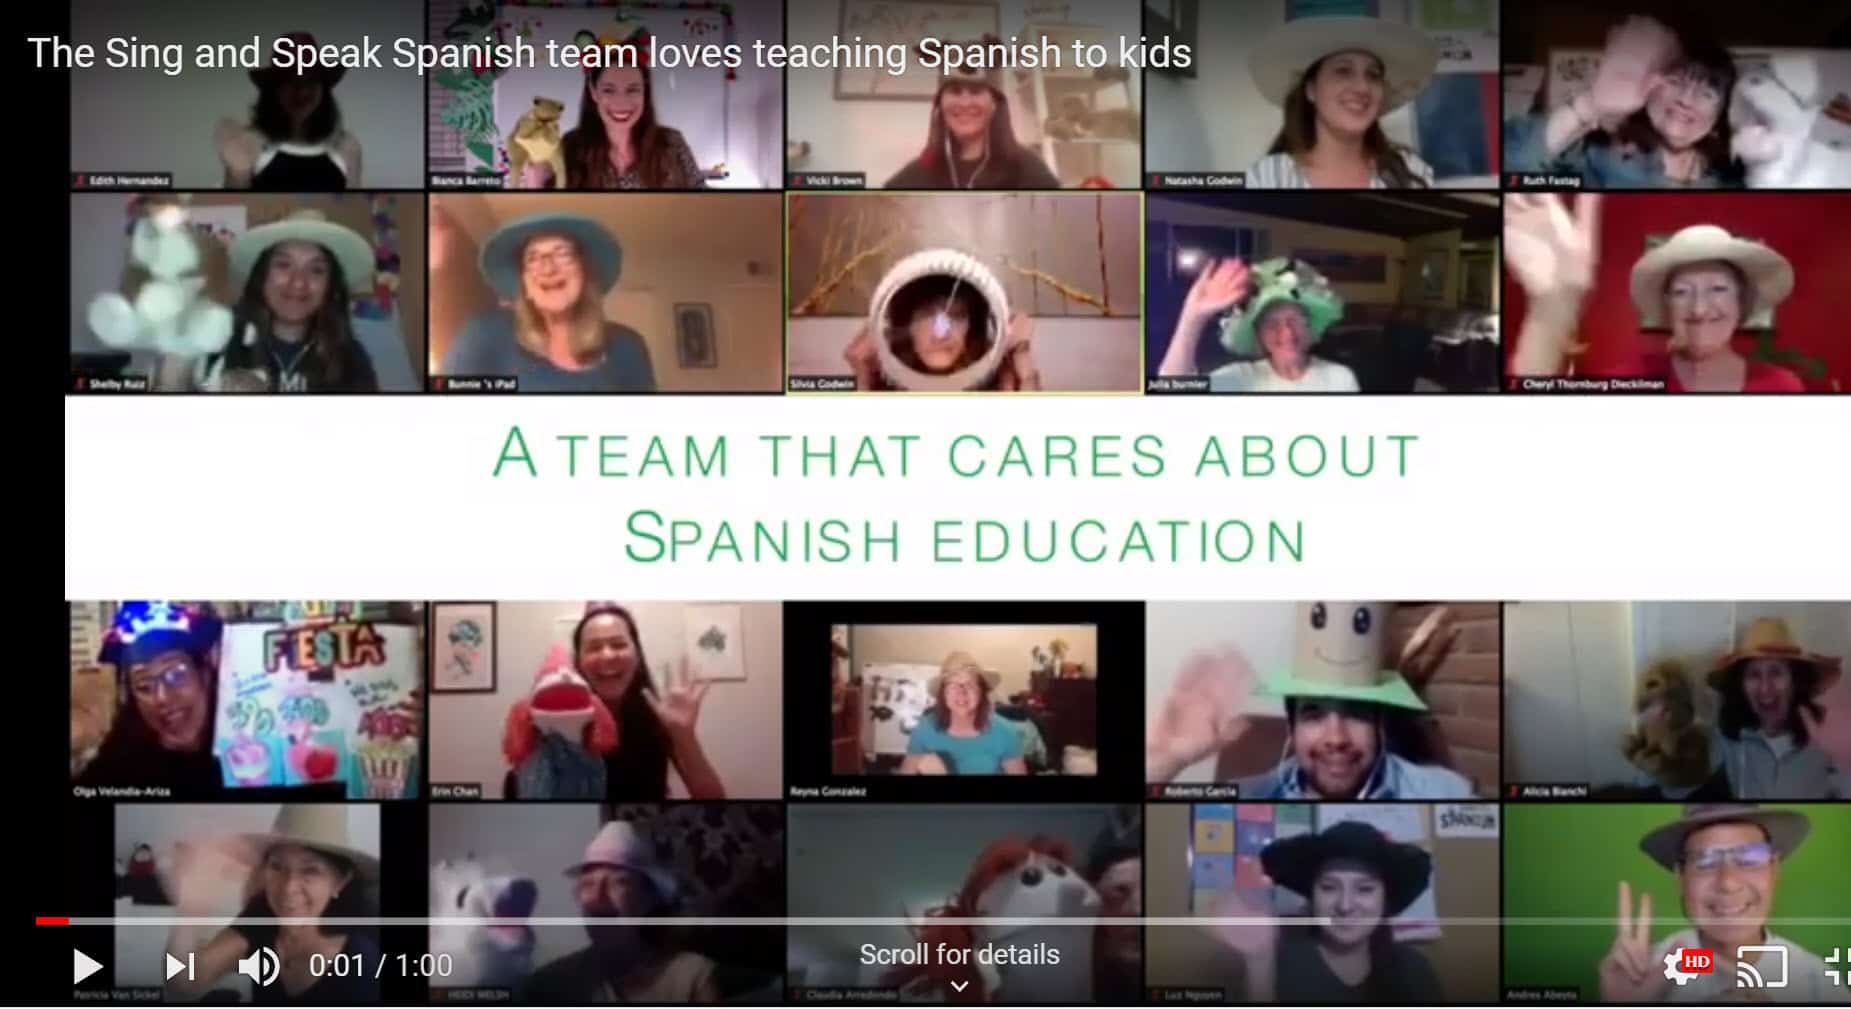 These fun Spanish lessons really helped my kids love the Spanish culture, all while learning to converse in a new language!